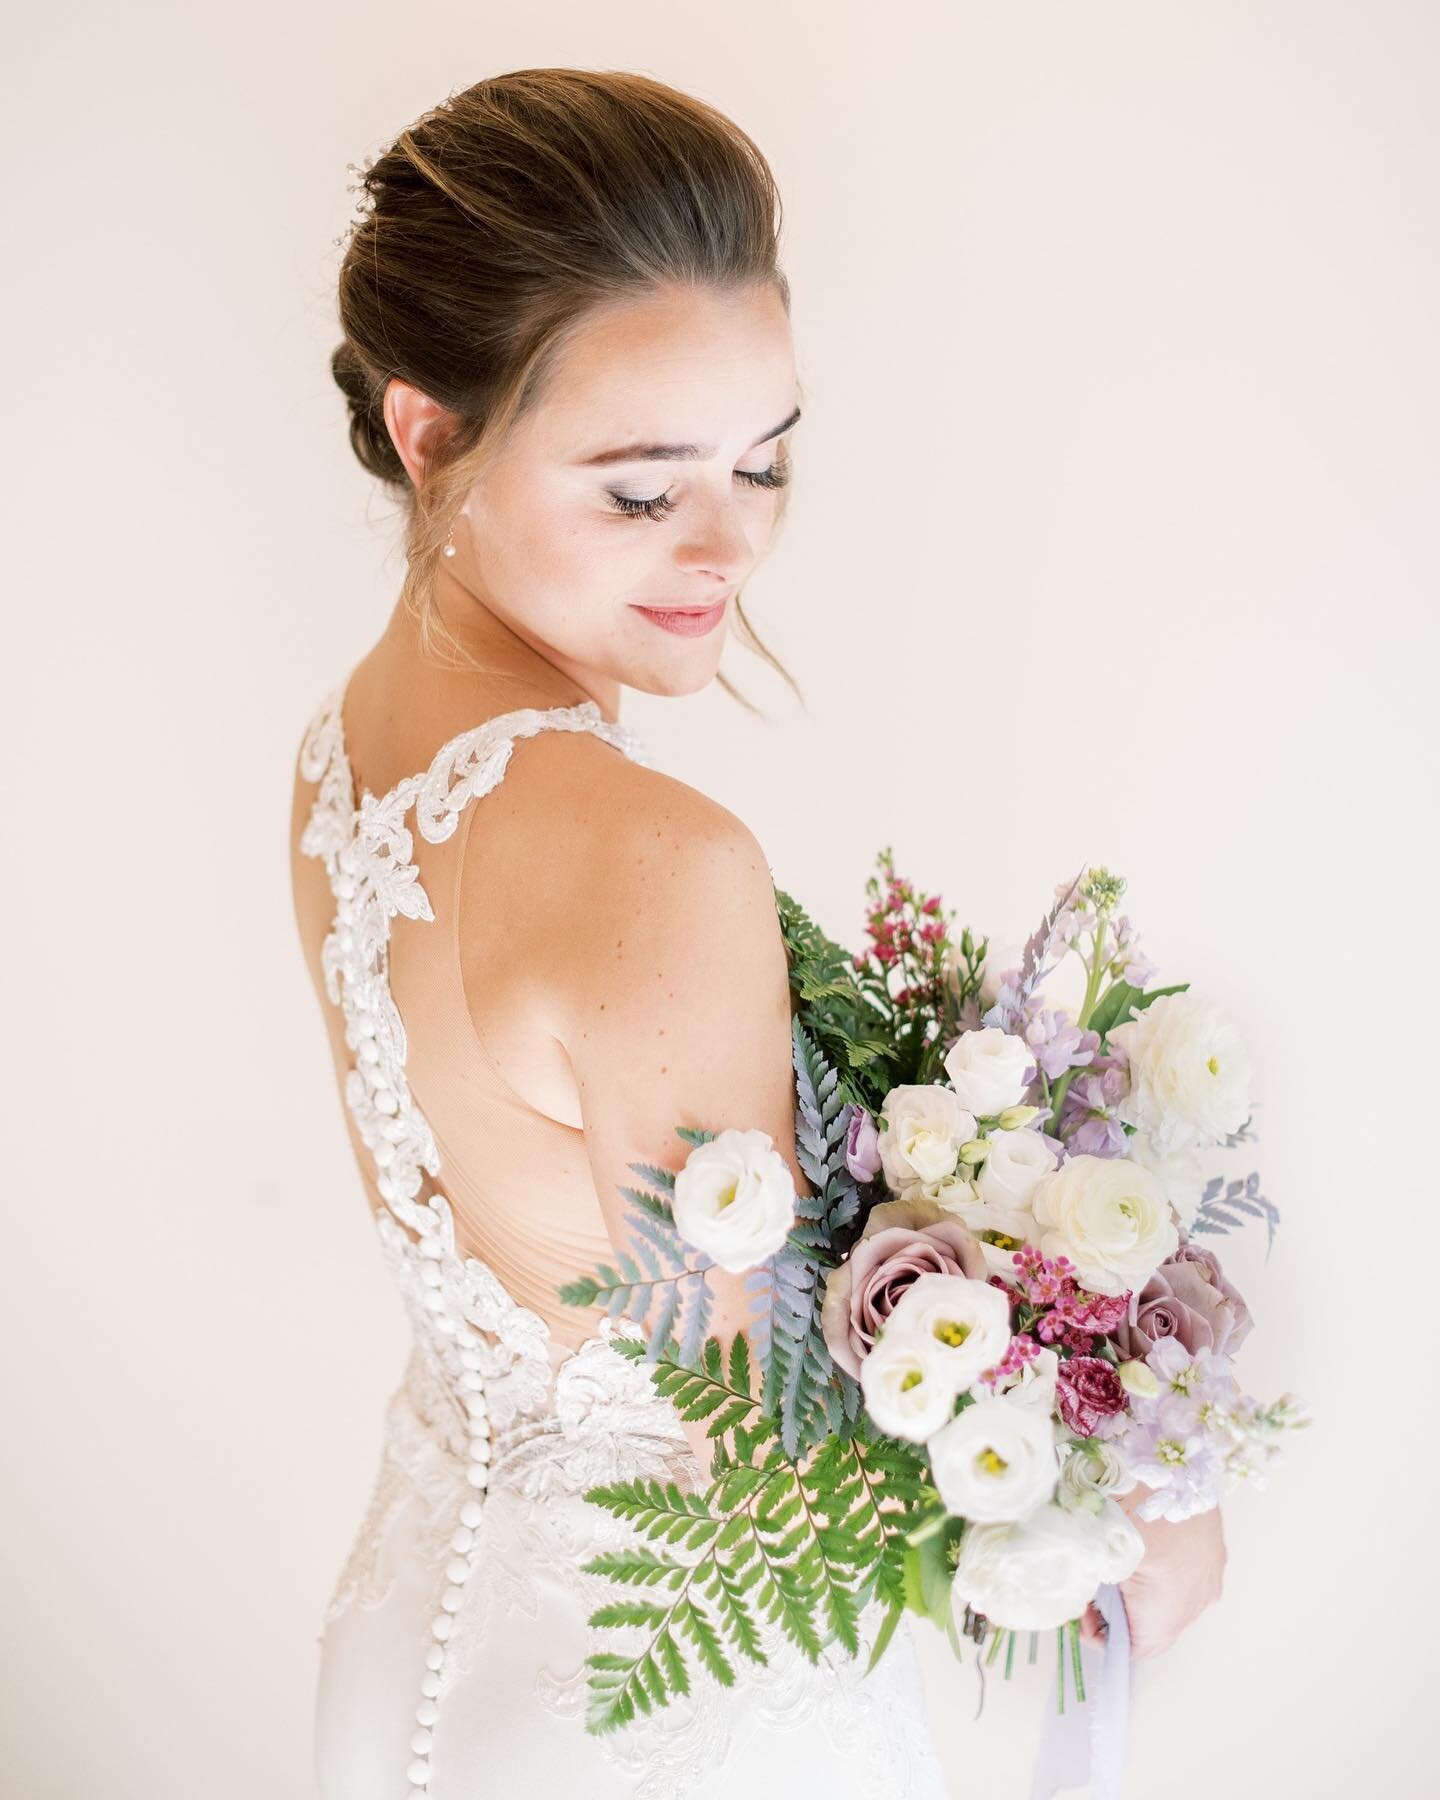 Radiating beauty from the inside out. 💜

photography: @courtneydueppengiesser
planner: @midwesternbride
floral: @1209creative
h&amp;m: @triciaclarkebridal
videography: @thornecine
venue: @cooperagemke
dress: @martinalianabridal | @whitedressbridalbo